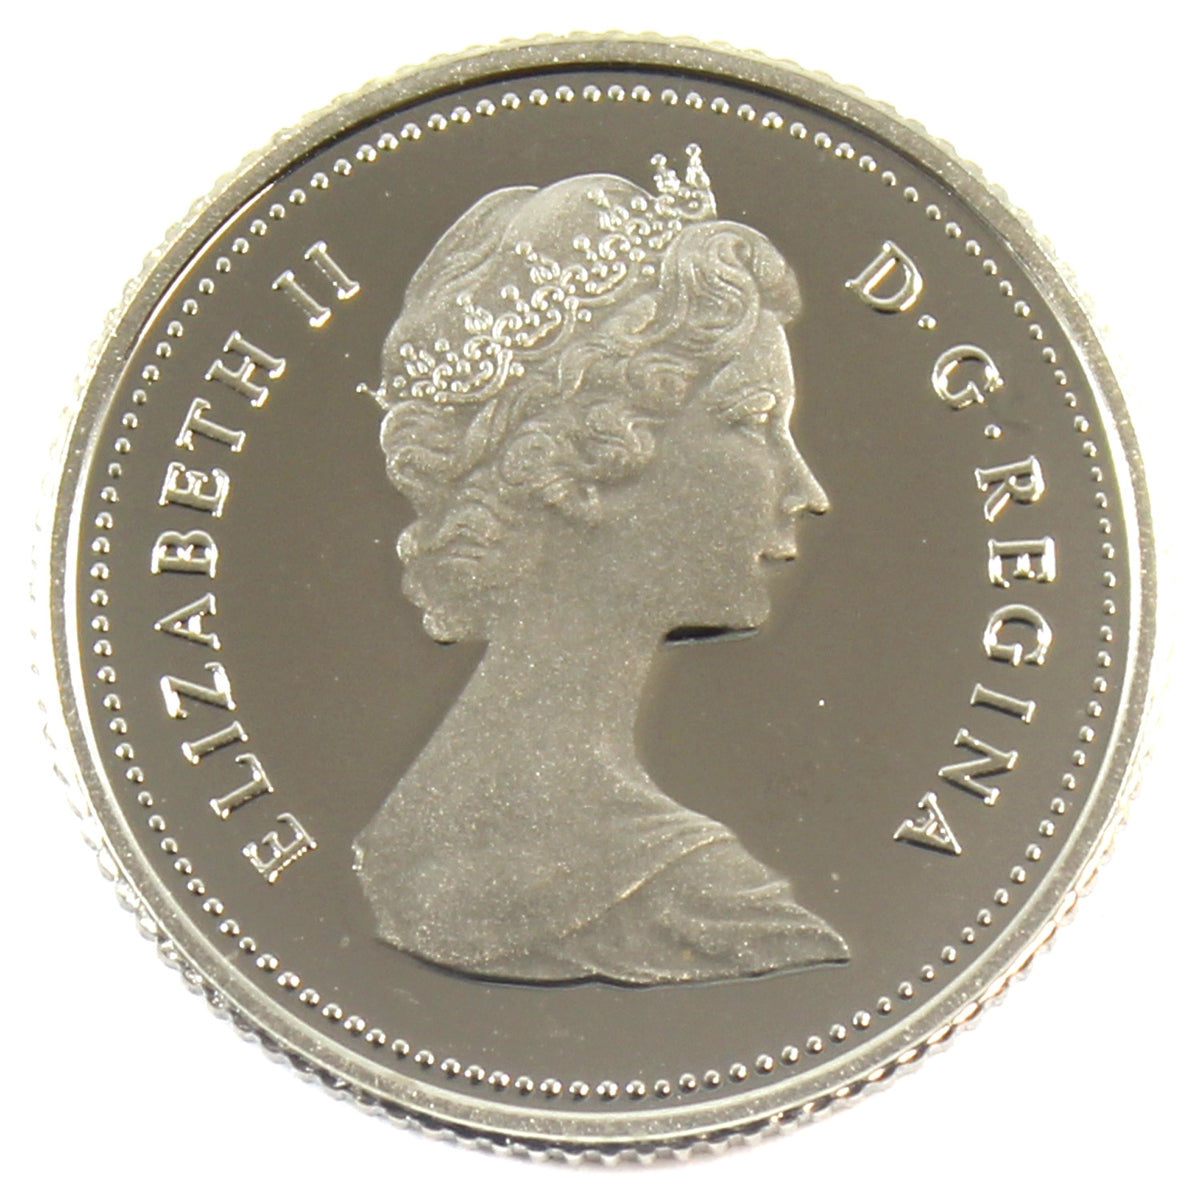 1981 Canada 10-cent Proof